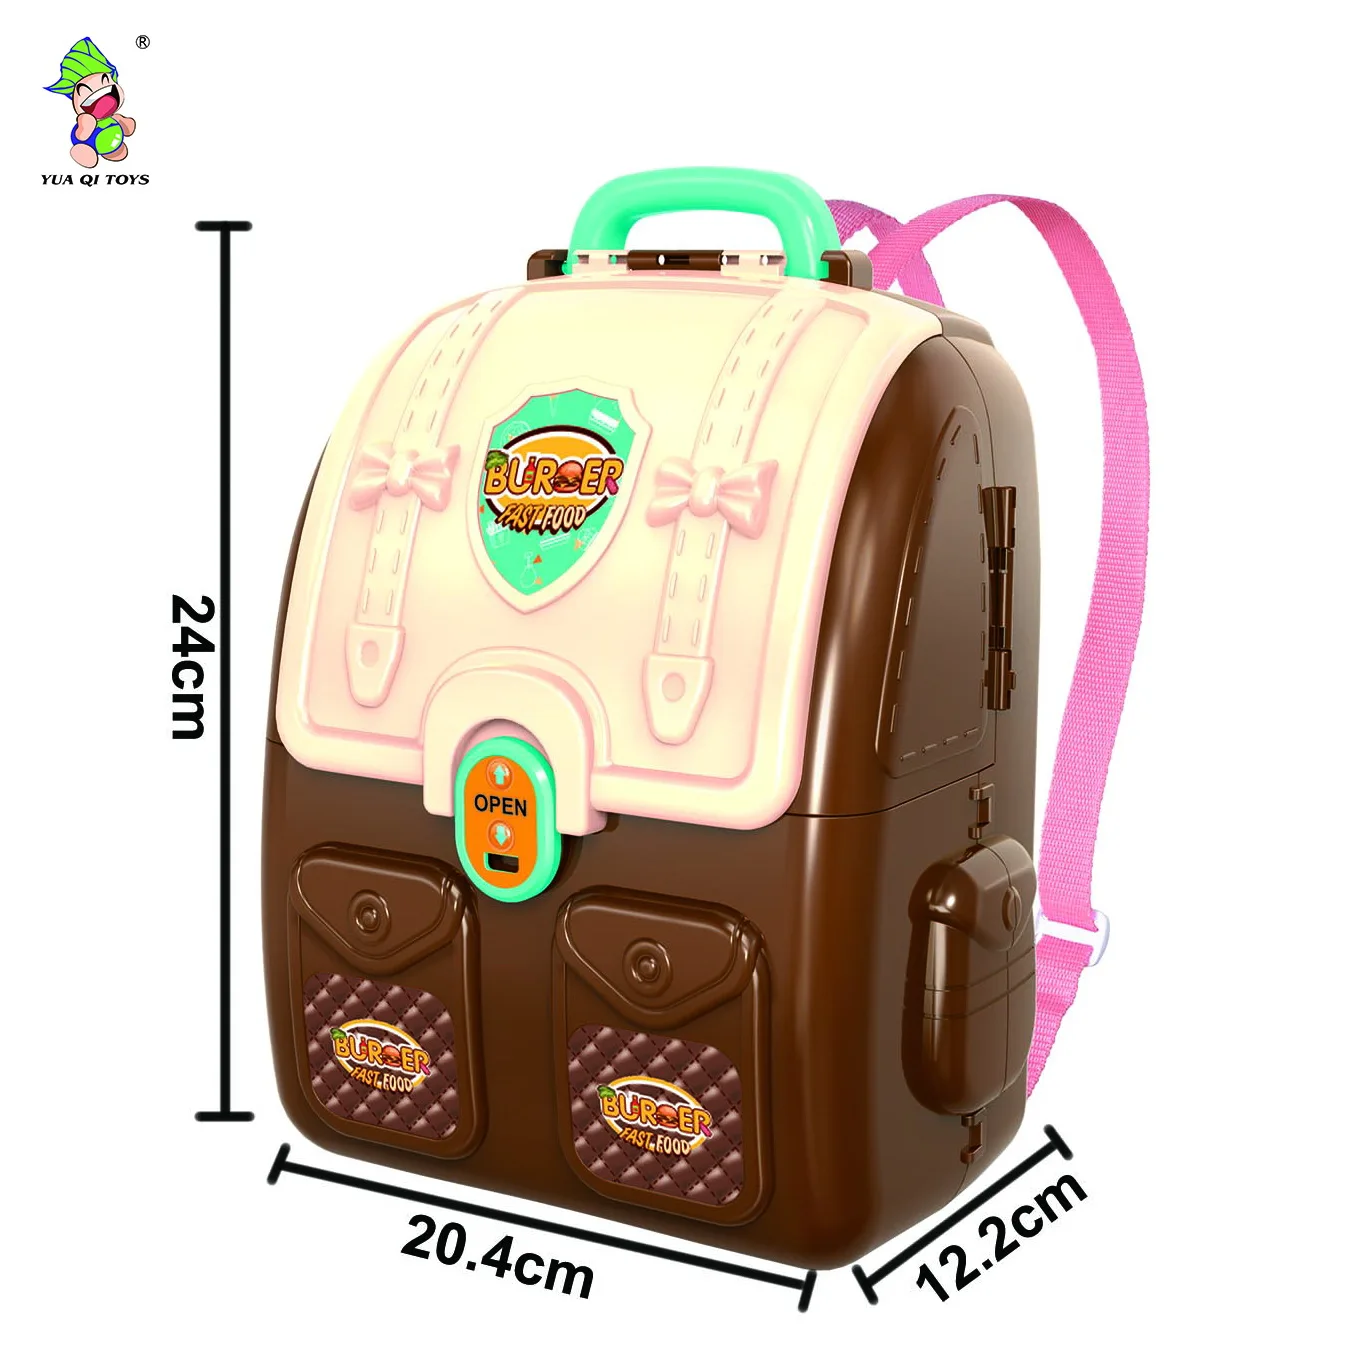 HAPPYSUNNY Toddler Backpack and Lunch Box Set for Boys 2-in-1 Machineshop  Truck Kids Backpack and Insulated Lunch Bag Compartment